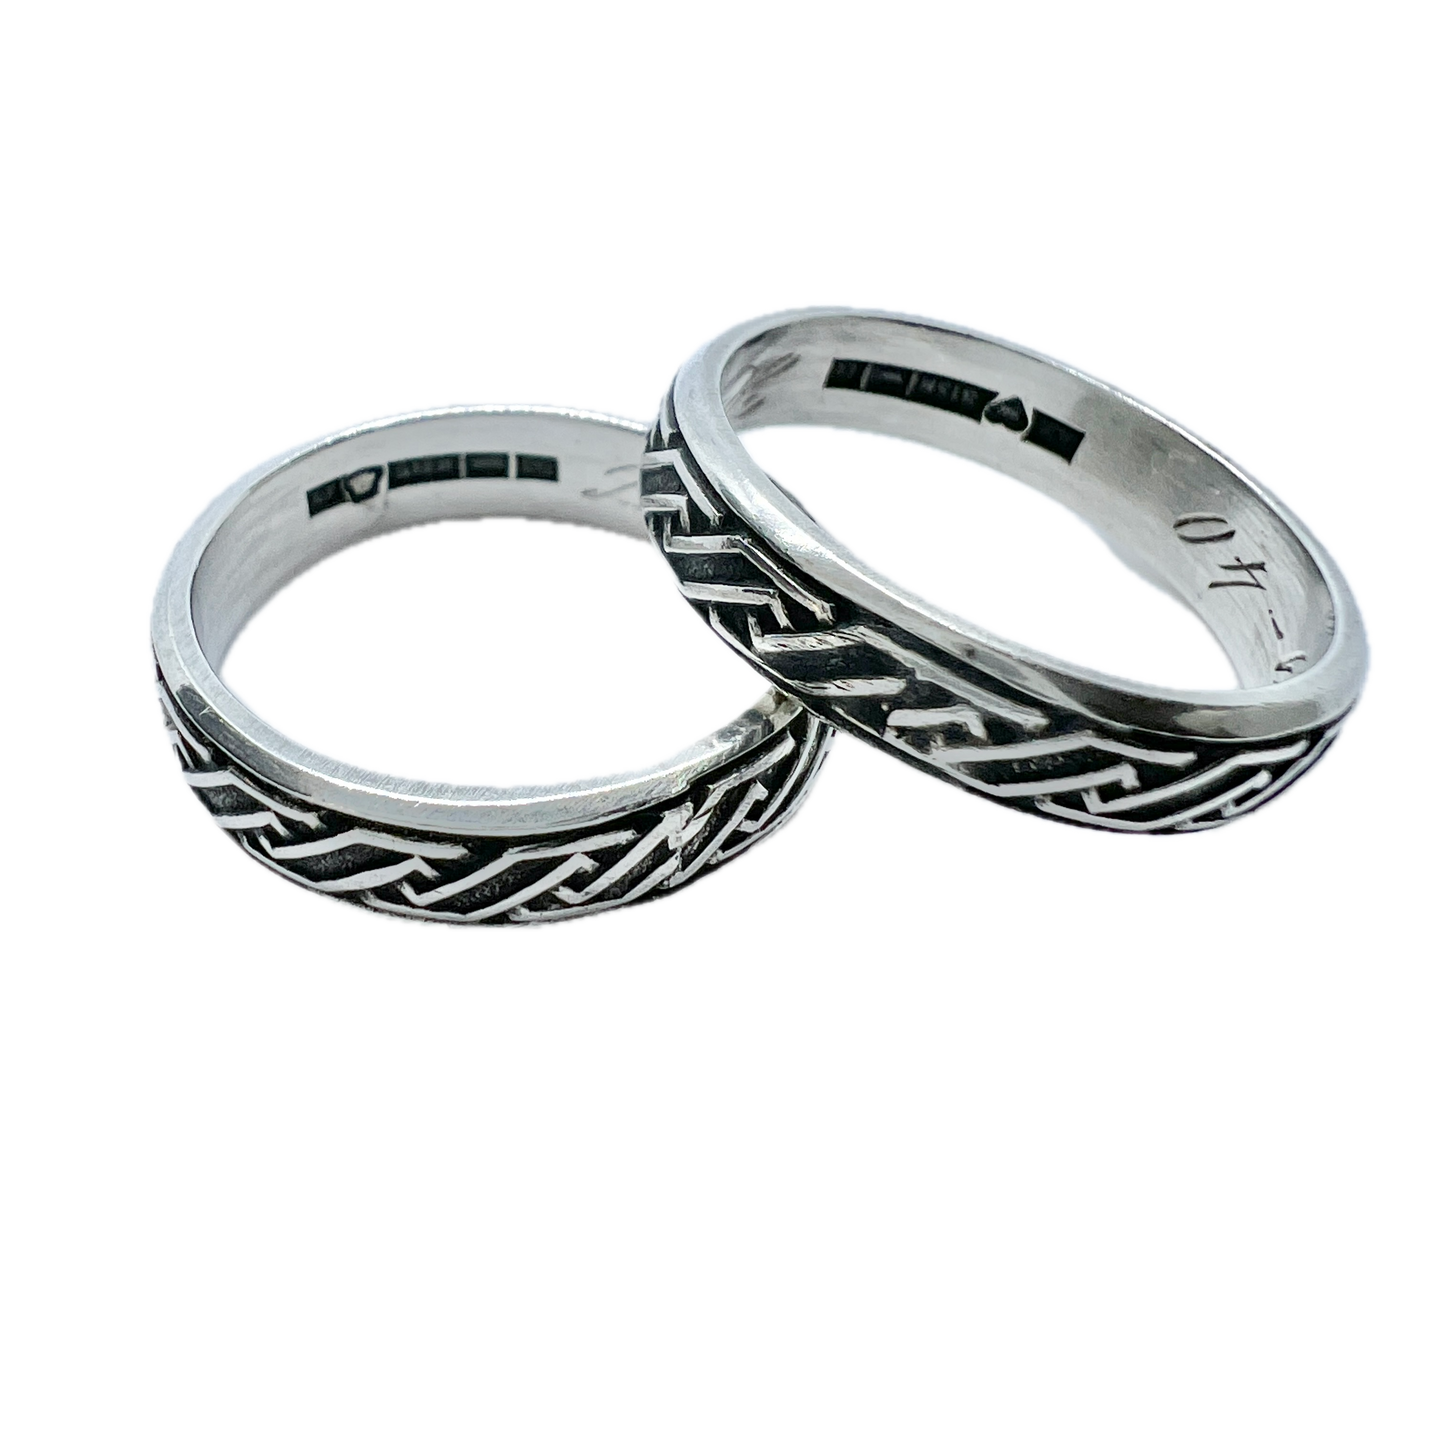 A.Taivainen, Finland 1940. Rare War-Time Pair of Solid Silver Wedding Band Rings.